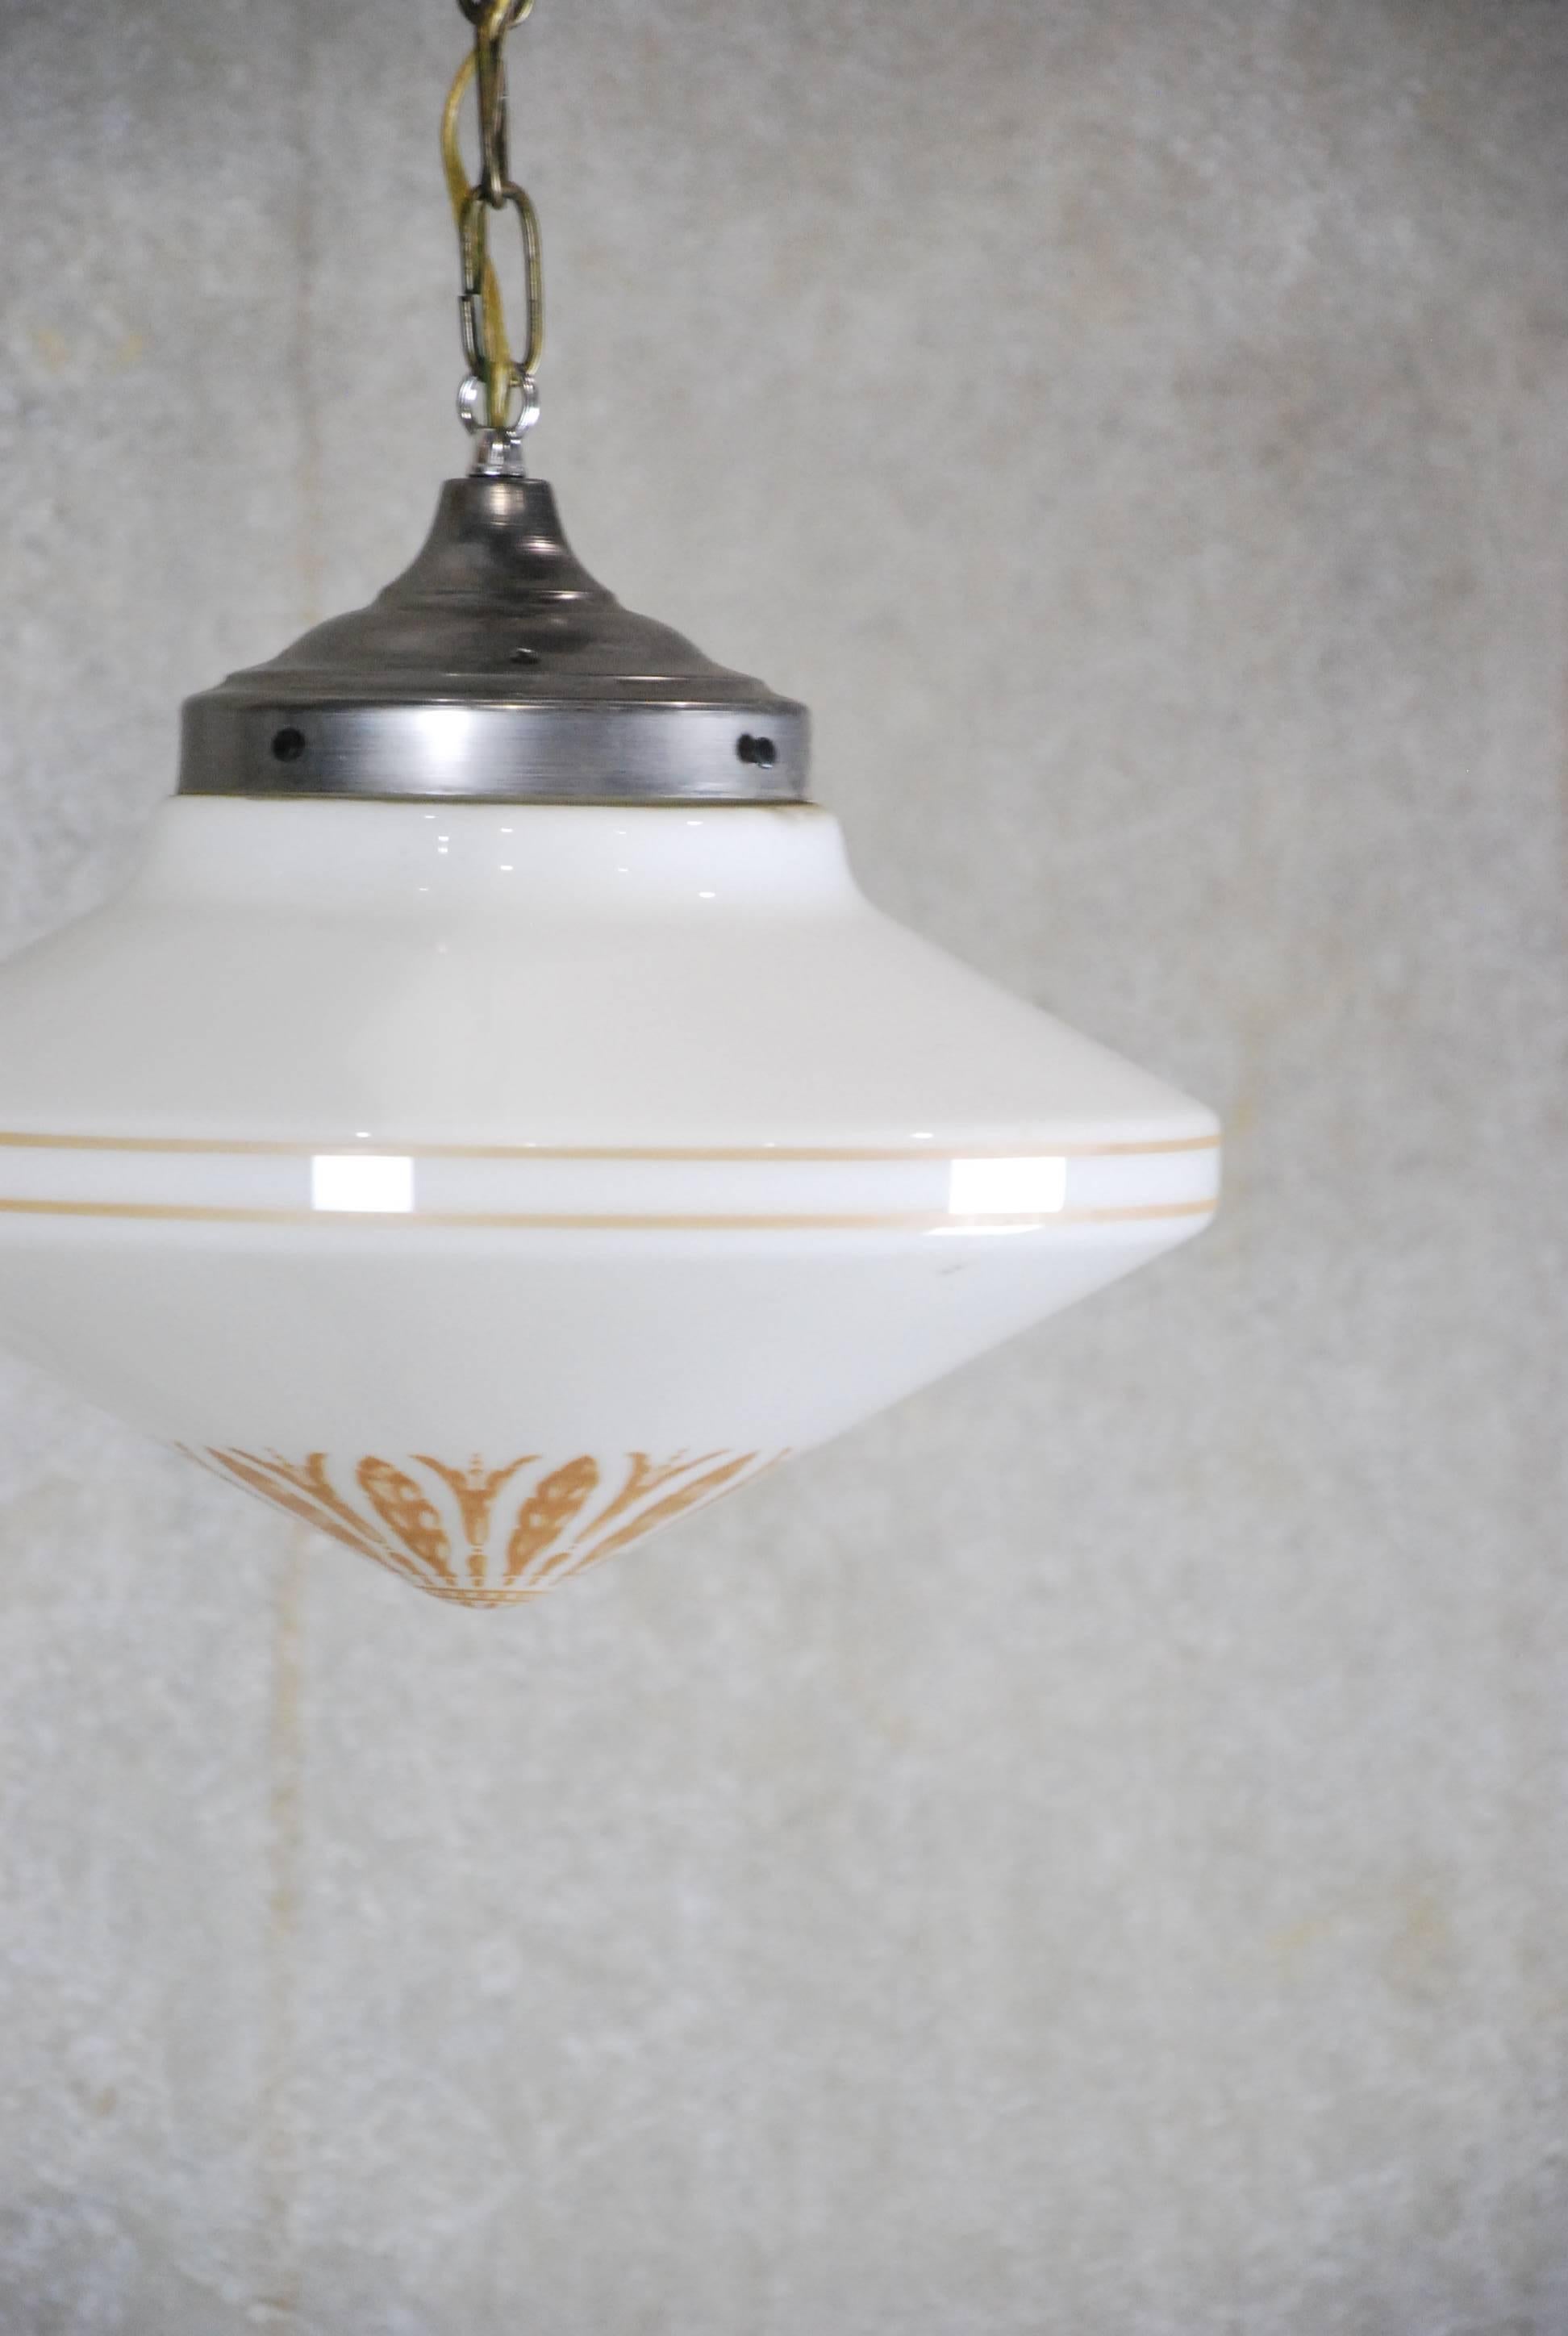 Art Deco-style pendant lights with original fitters and ceiling caps. Found in upper New York state. All re-wired and CSA approved; some adjustment to chain lengths available upon request. Quantity of 15 in stock. Price per item.